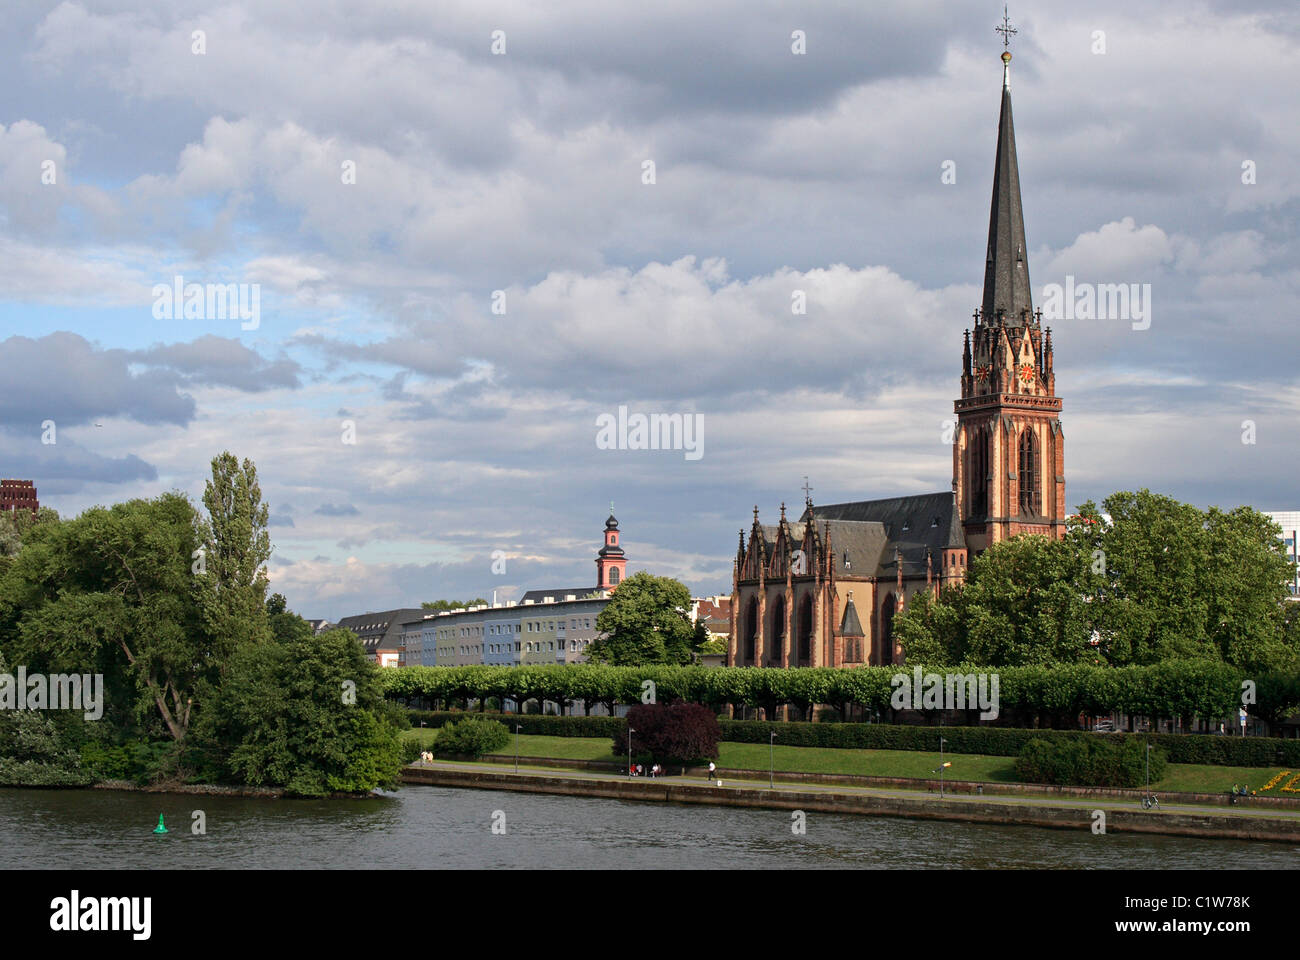 A church on the banks of the Main River in Frankfurt, Germany. Stock Photo